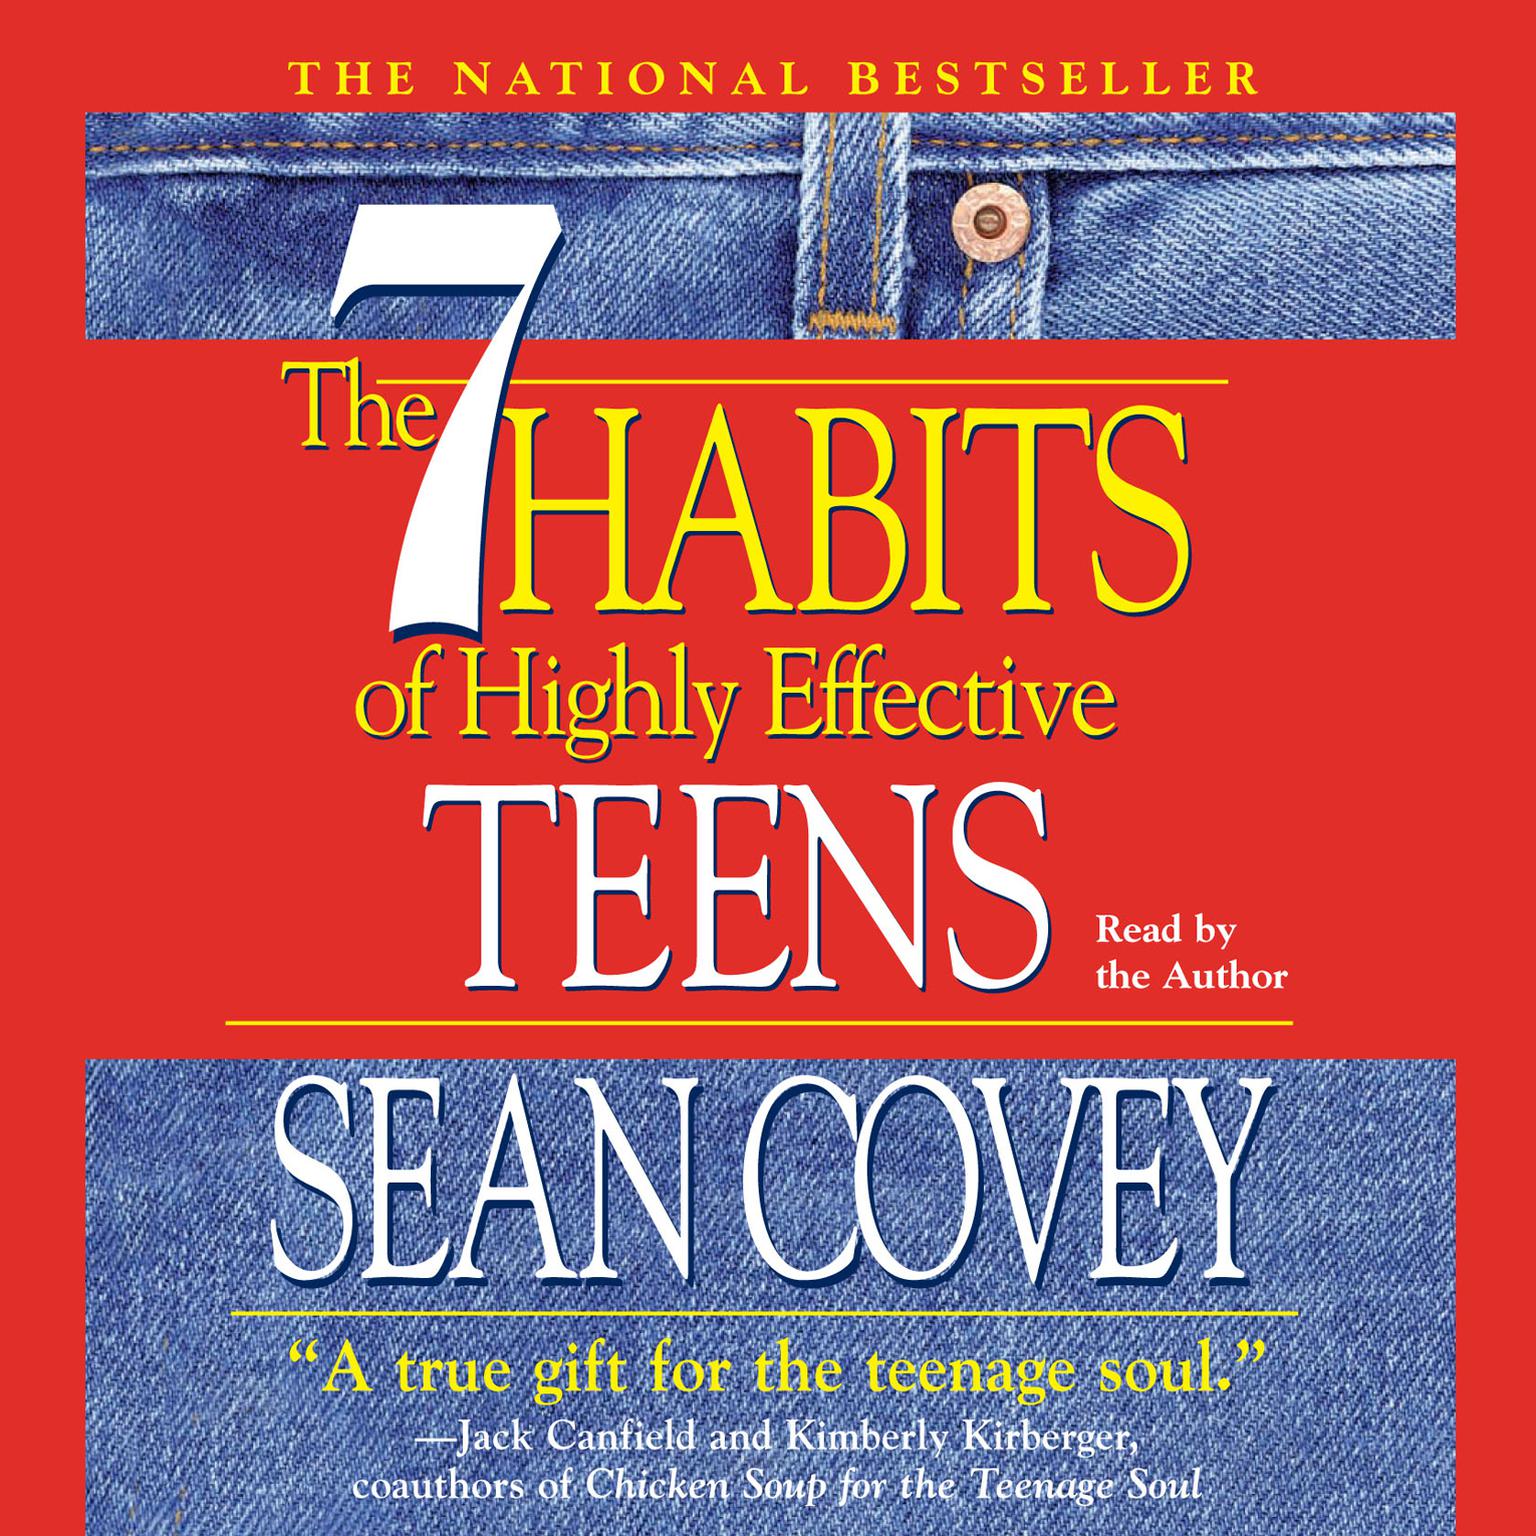 The 7 Habits of Highly Effective Teens (Abridged) Audiobook, by Sean Covey